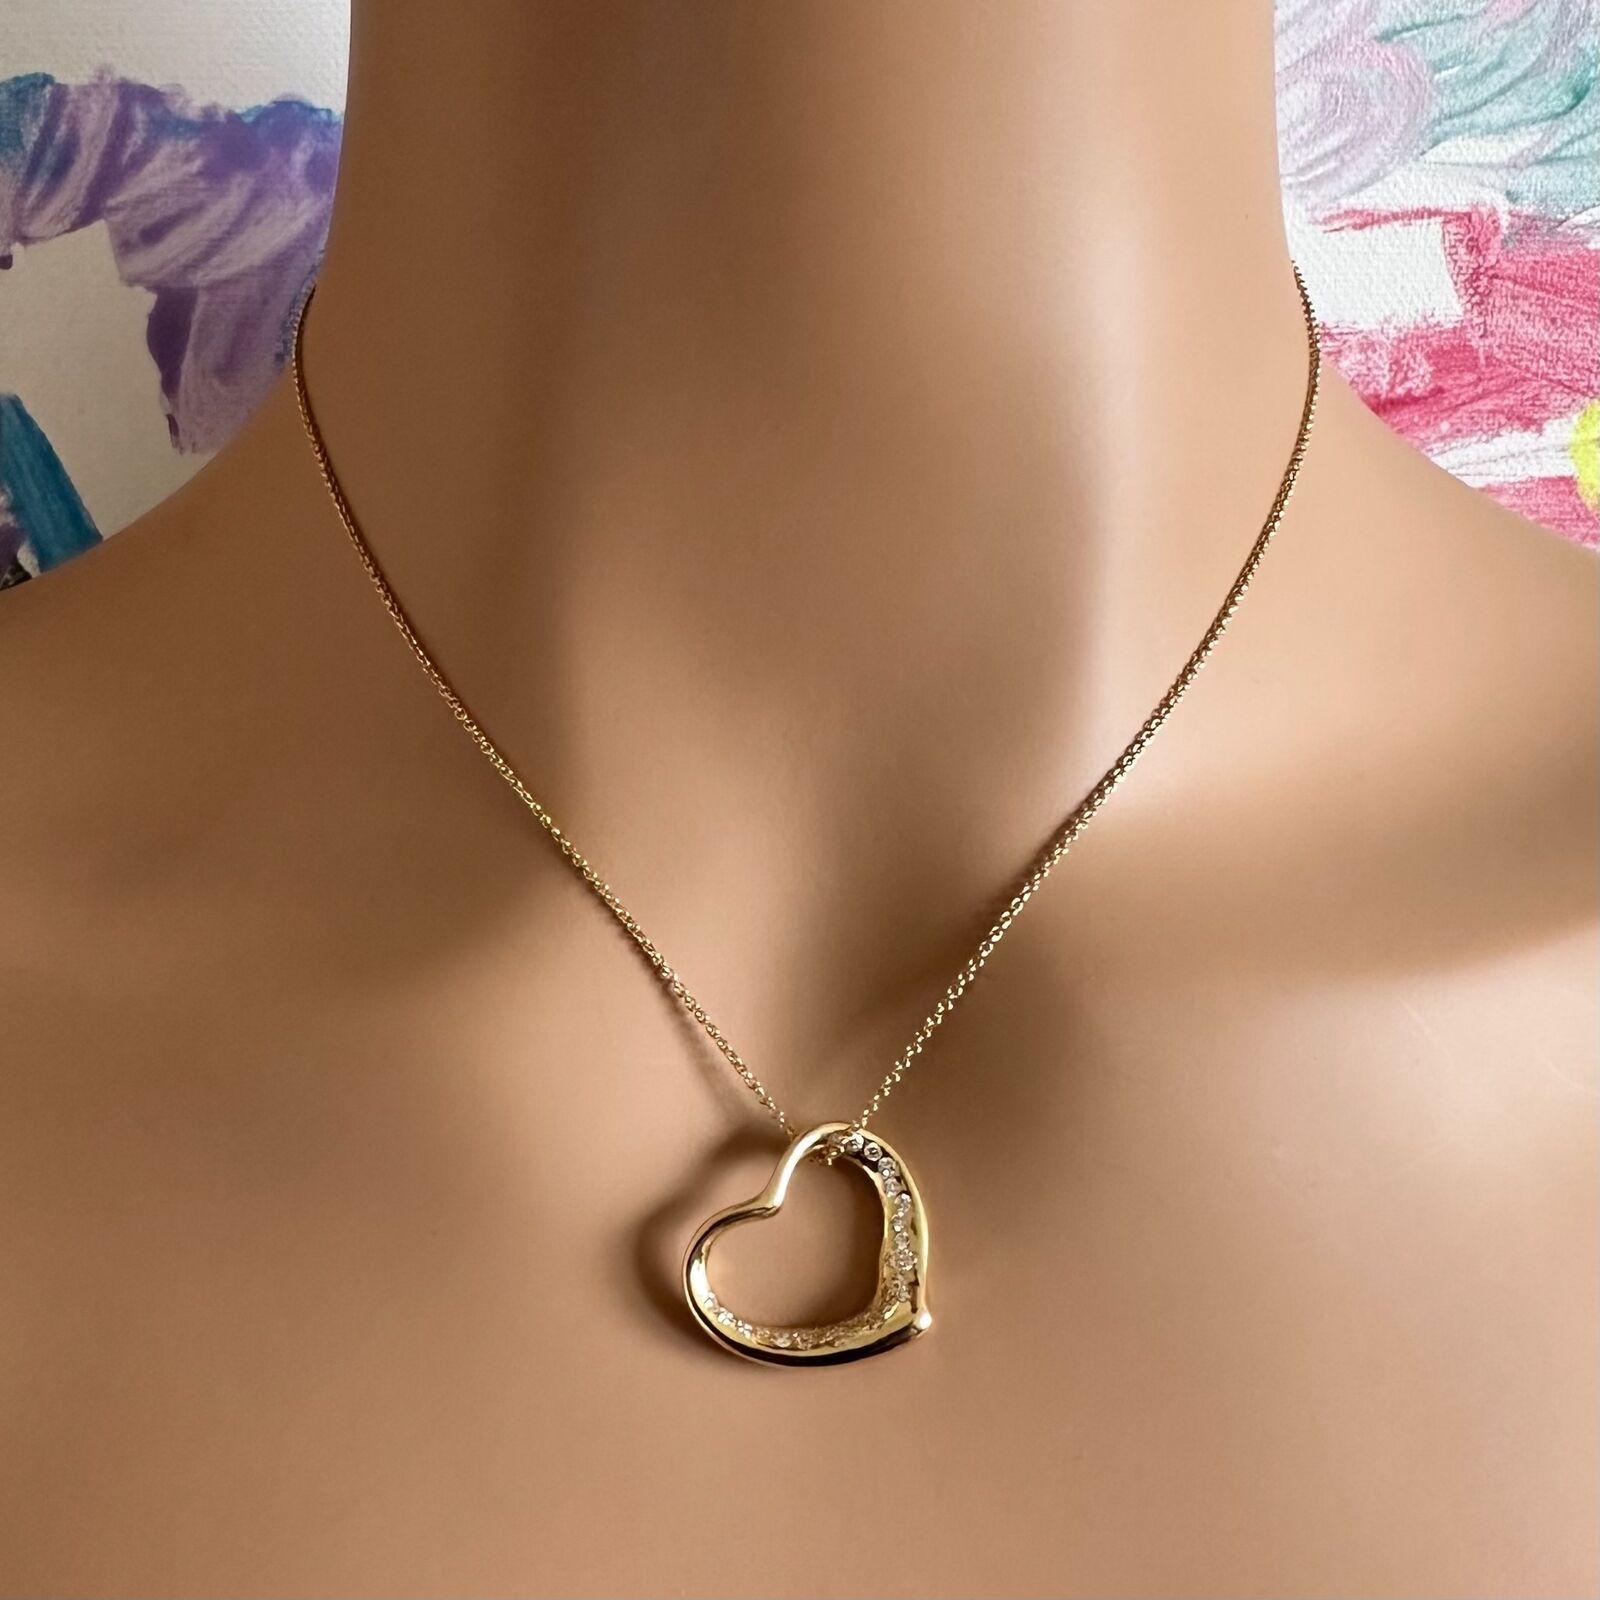 Tiffany & Co Elsa Peretti Diamond Open Heart Yellow Gold Pendant Necklace In Excellent Condition For Sale In Holland, PA